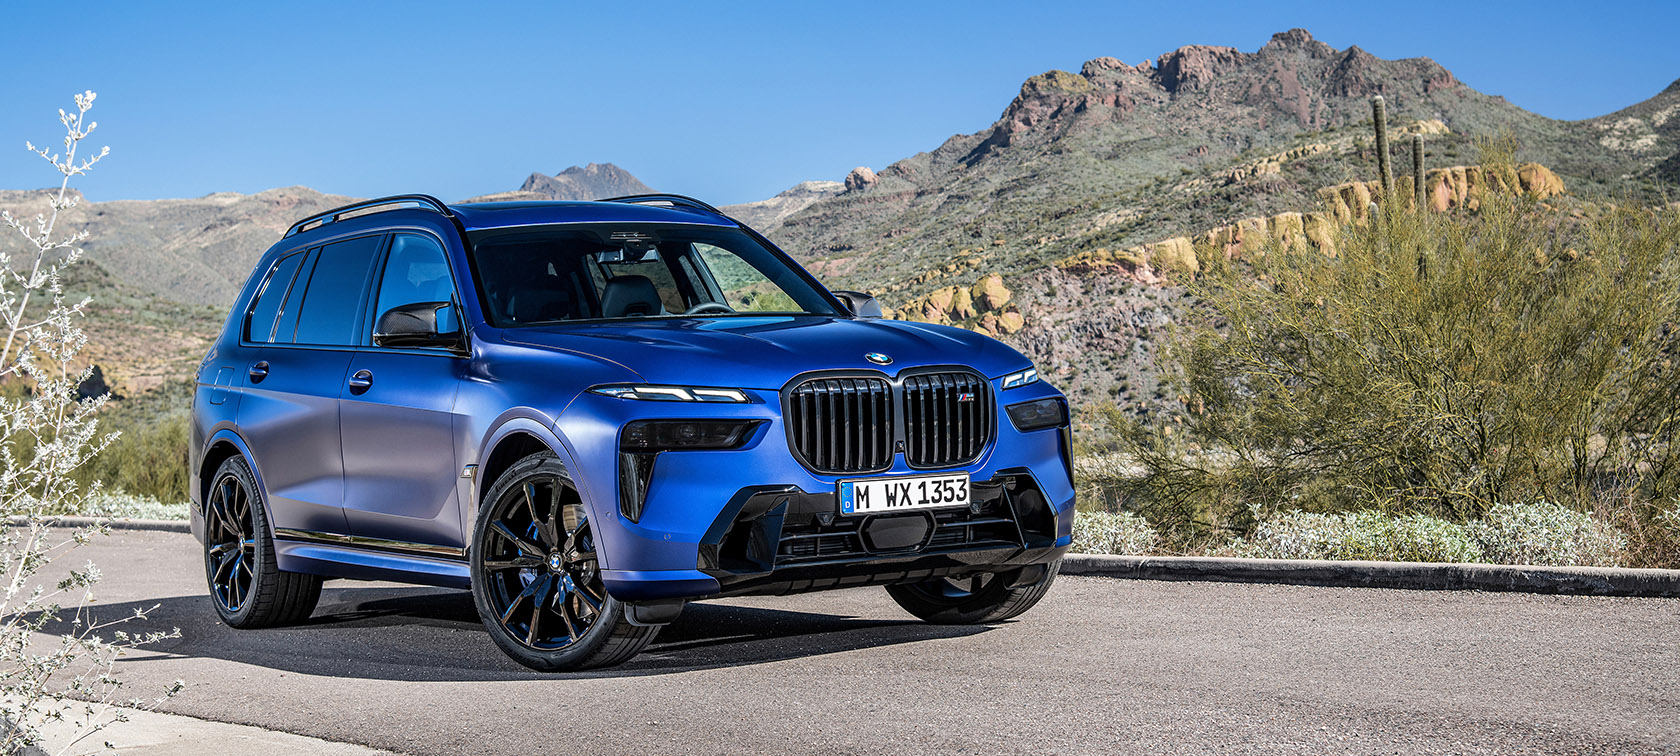 The new BMW X7